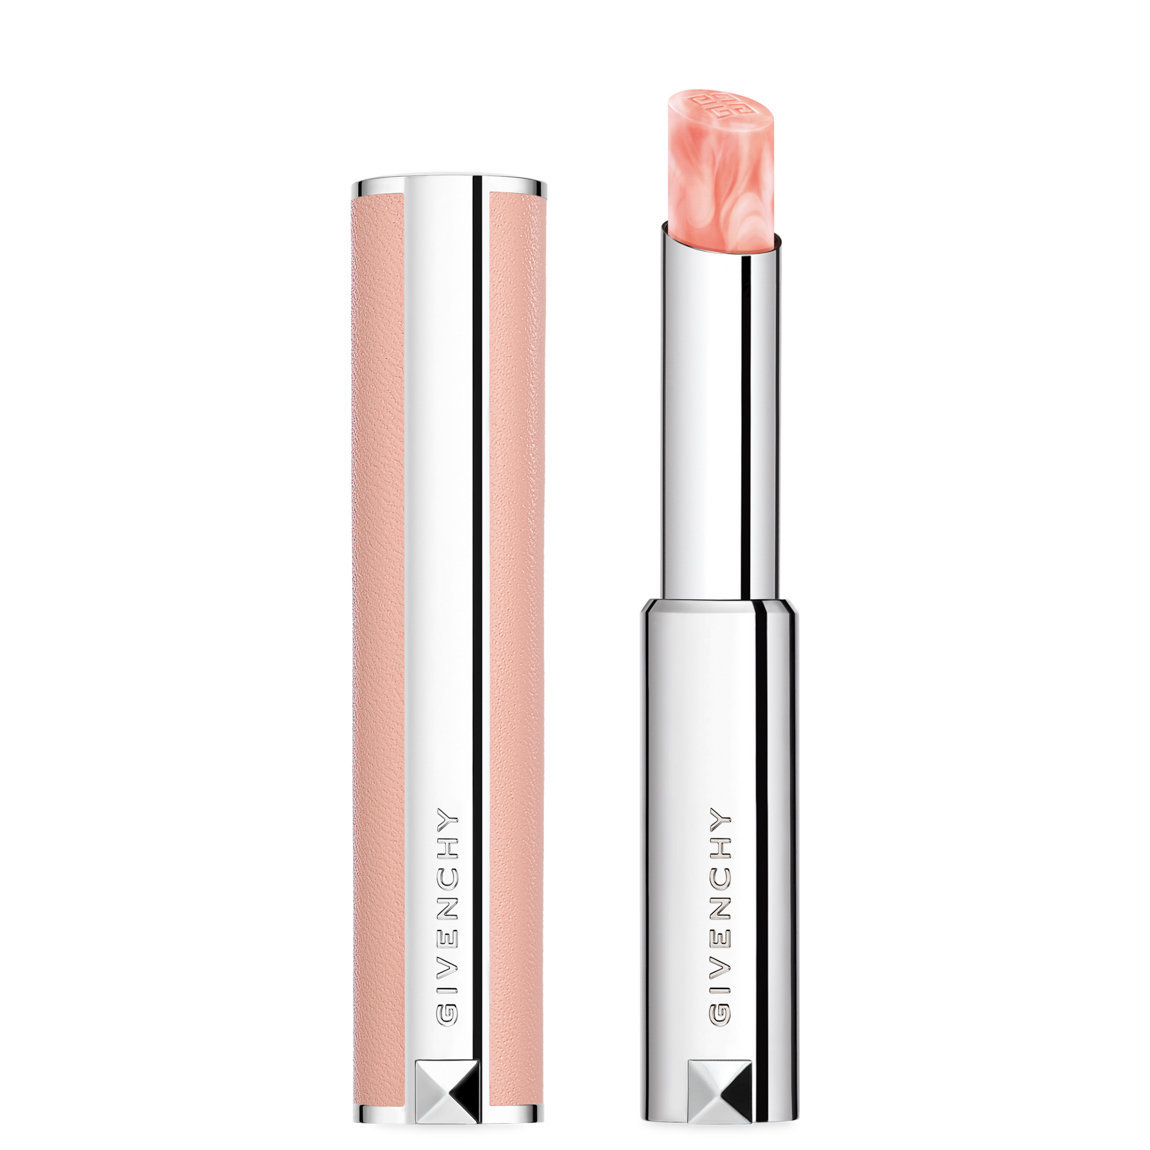 Givenchy Le Rose Perfecto N002 Vital Glow alternative view 1.